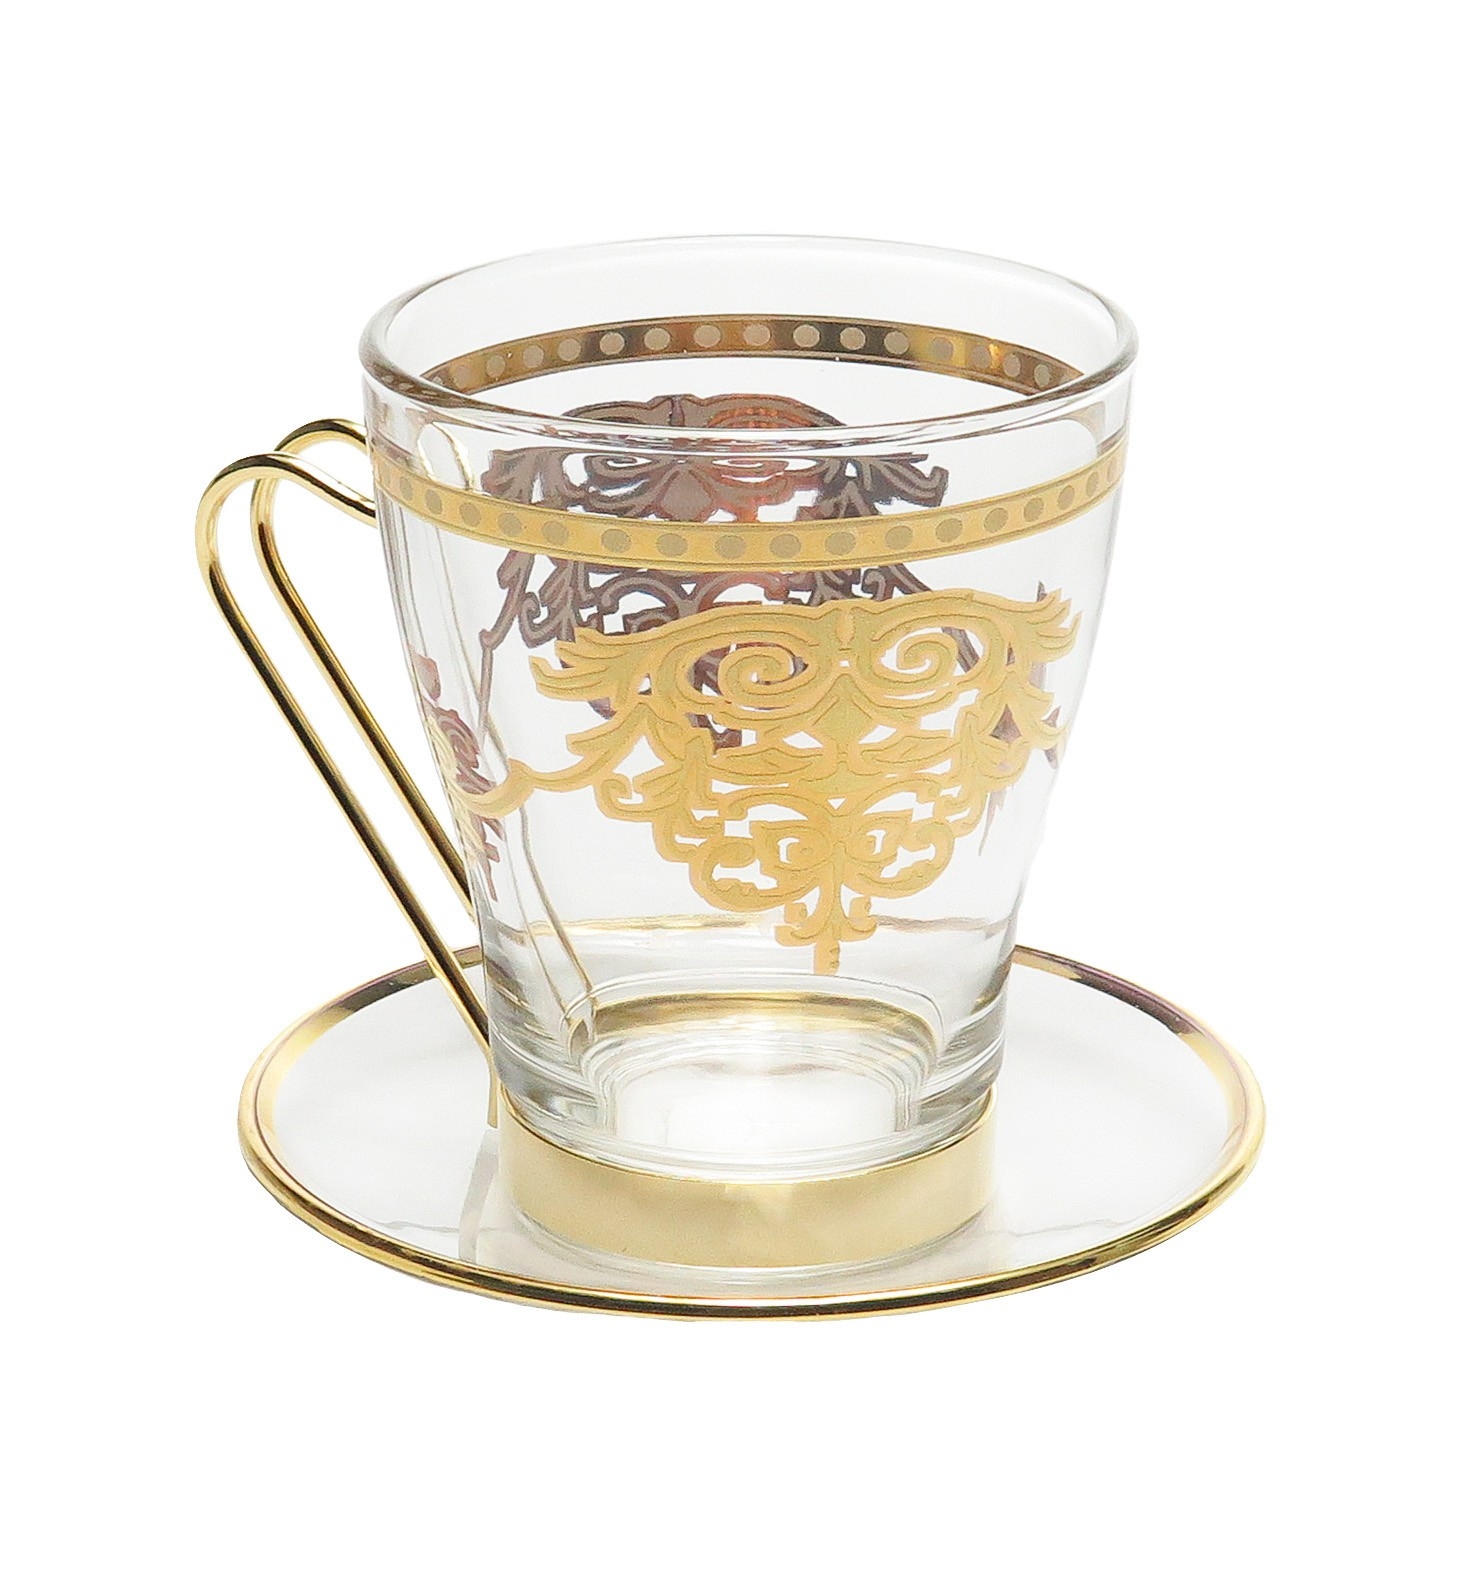 https://file.1001shops.com/MuranoGlassGifts/world-art-glass_Glass-Goblets_Set-Of-6-Tea-Cups-With-Plates-With-Rich-Gold-Design-5aaa7790b9ac5.jpg